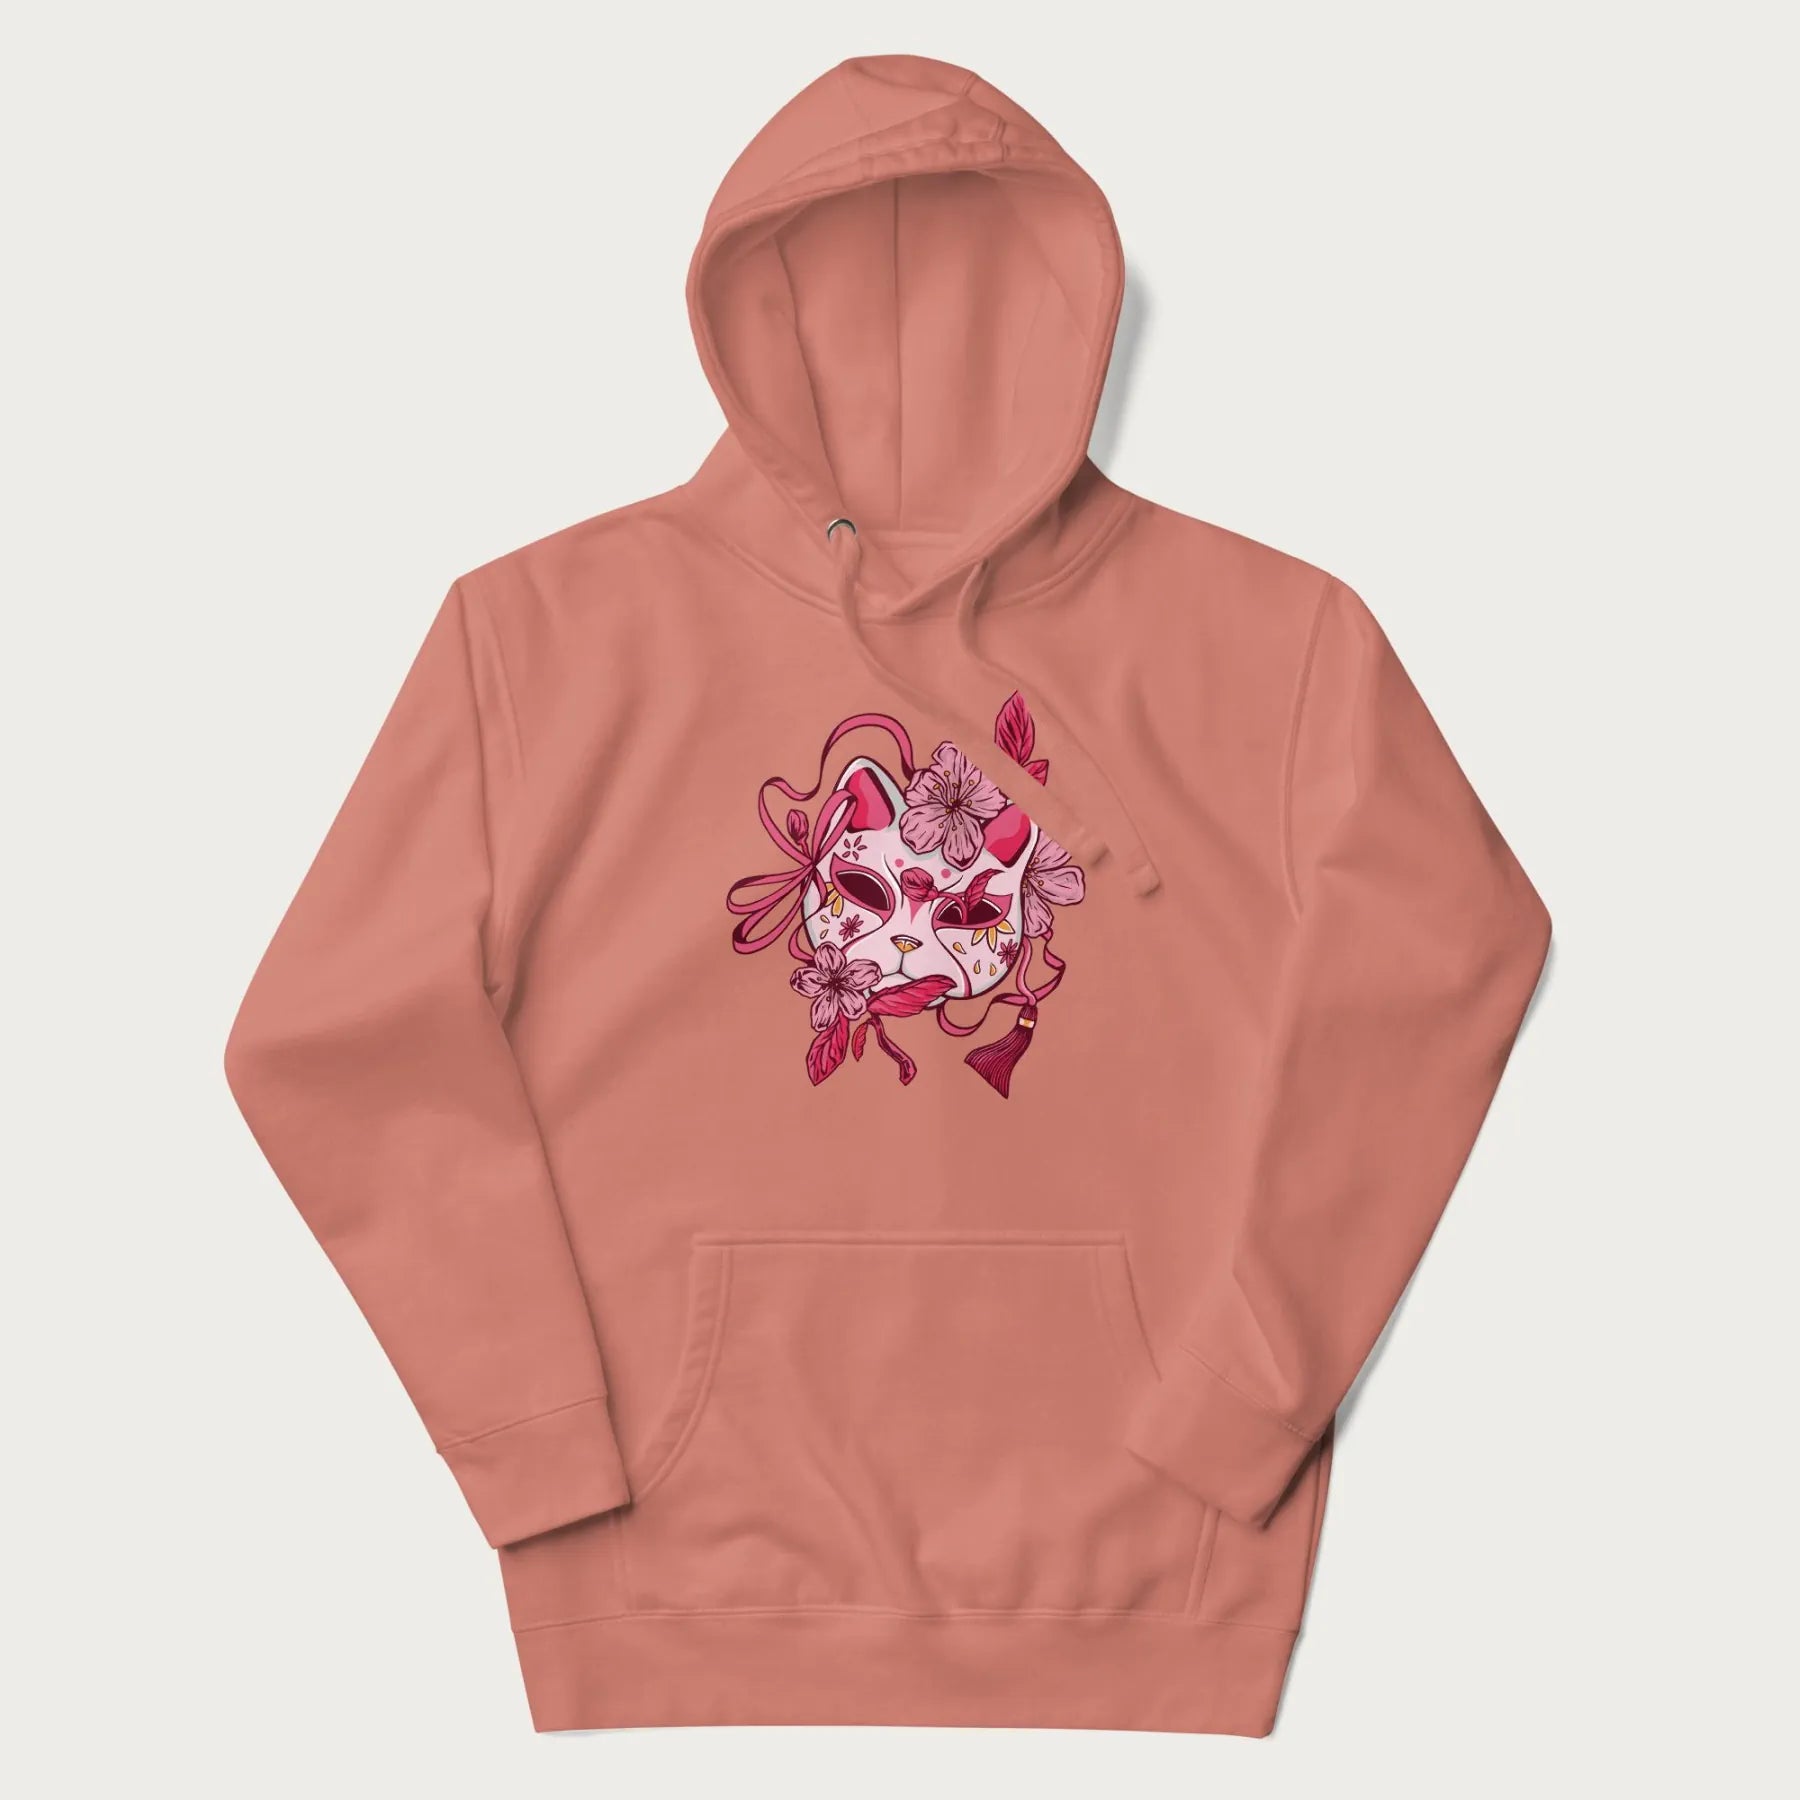 Light pink hoodie with a Japanese kitsune mask and sakura design on the front.